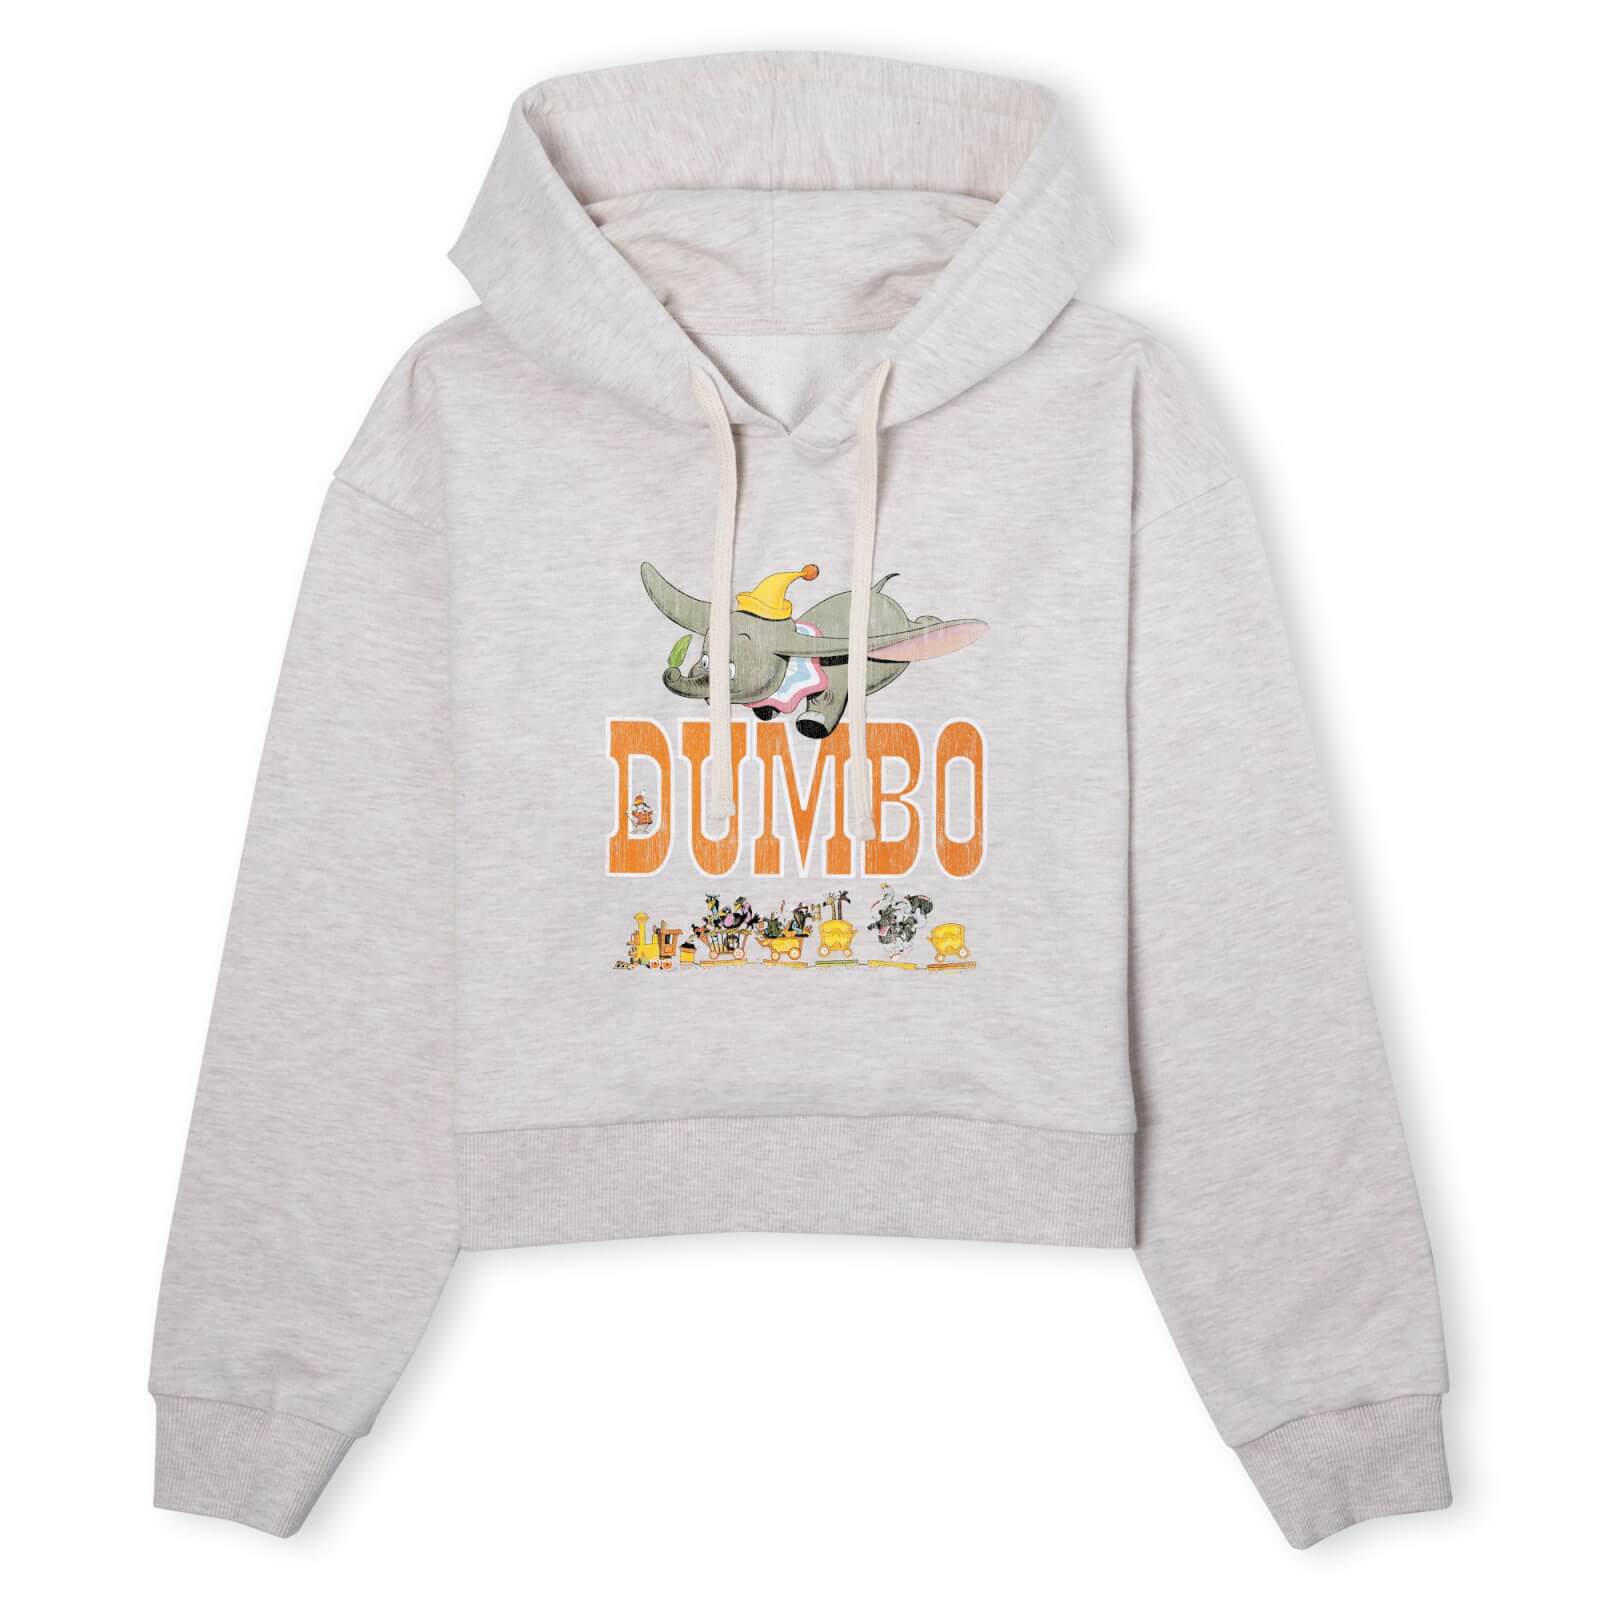 Dumbo The One The Only Women's Cropped Hoodie - Ecru Marl - M